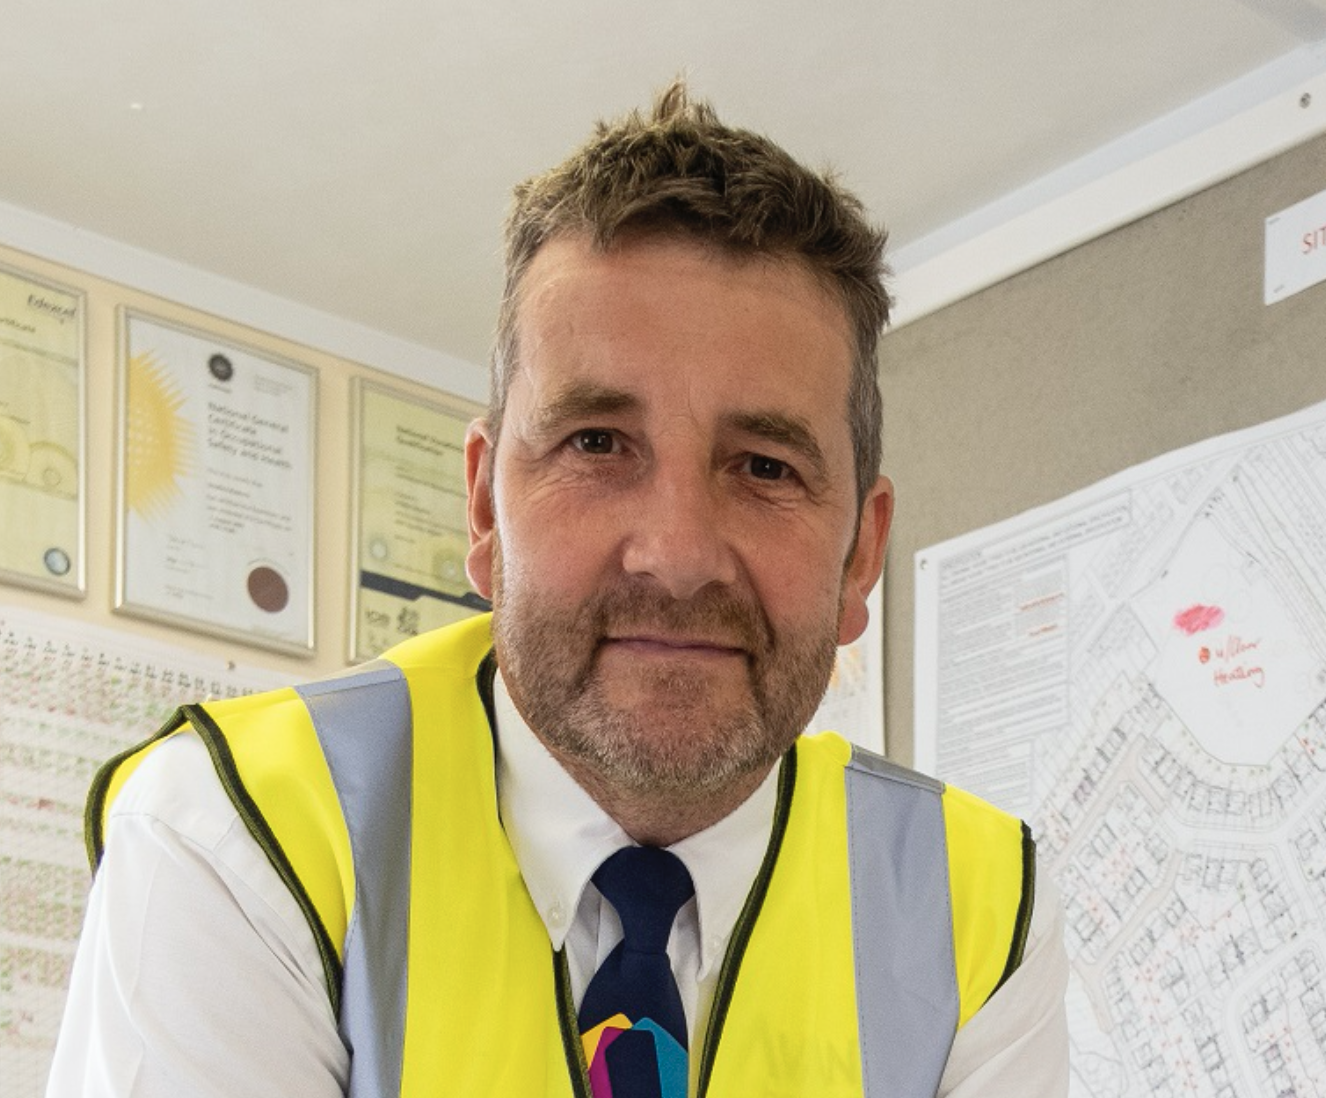 Avant Homes Yorkshire site manager wins industry award